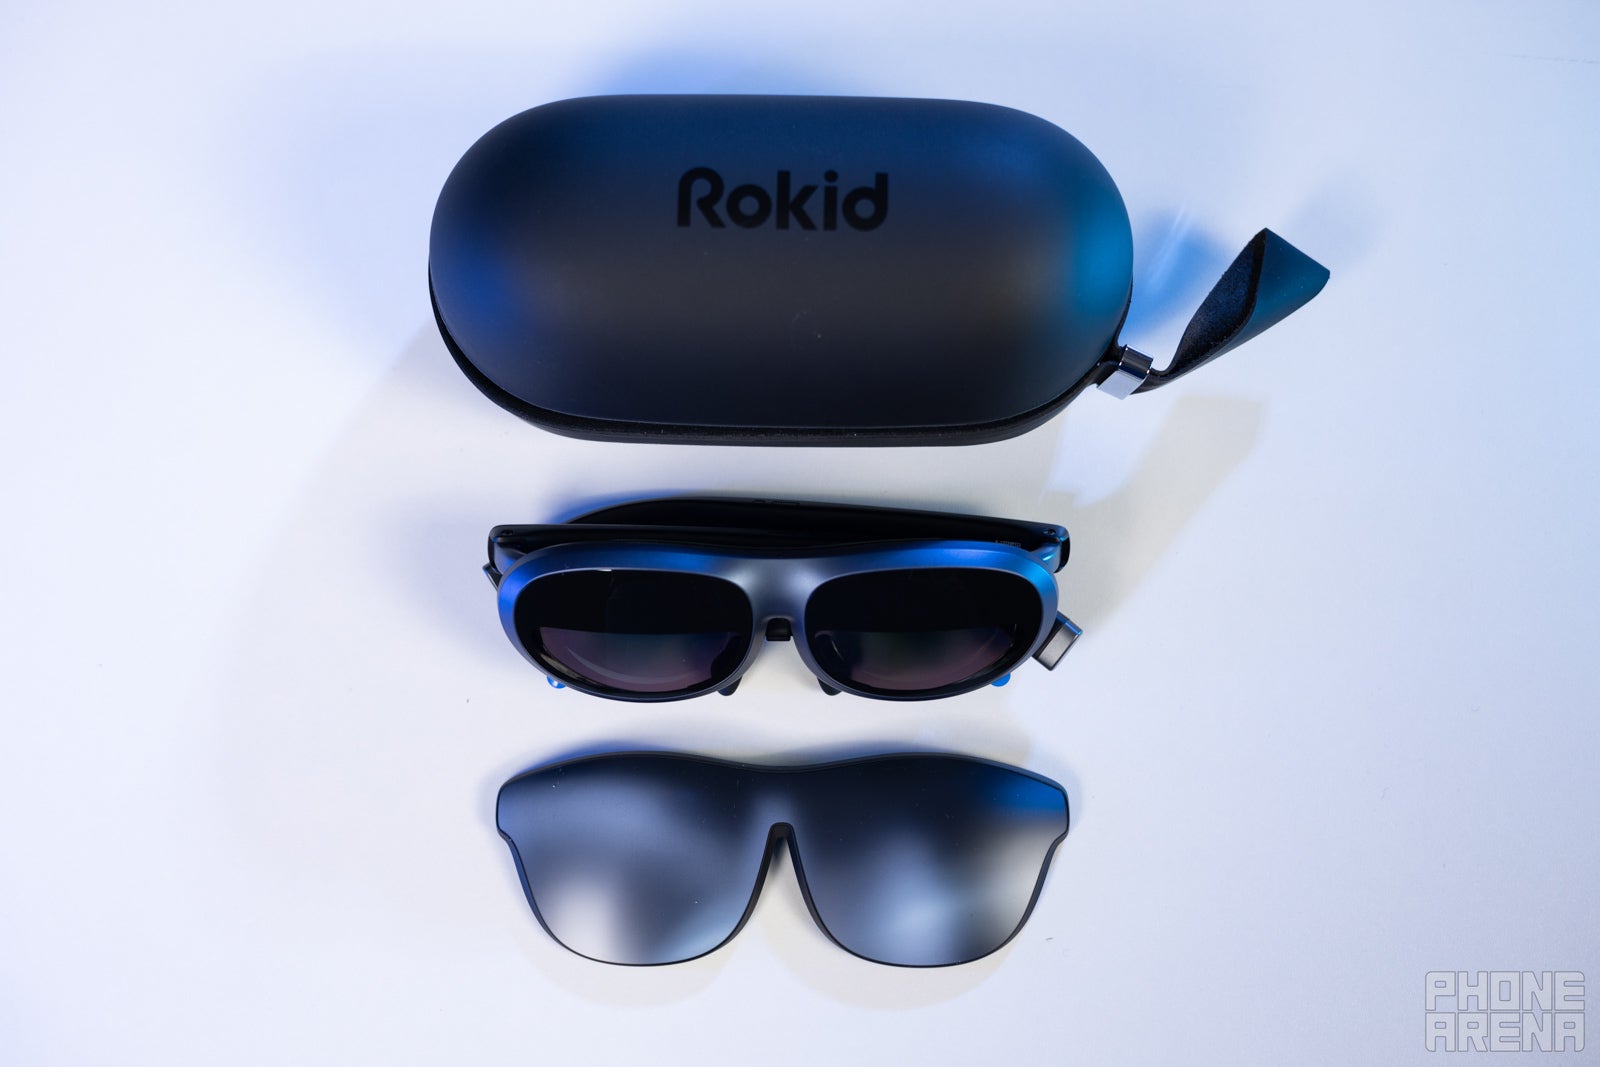 (Image credit - PhoneArena) The Rokid Max glasses, carrying case and lens cover - Rokid Max review: Impressive screen and sound, all in the form factor of sunglasses